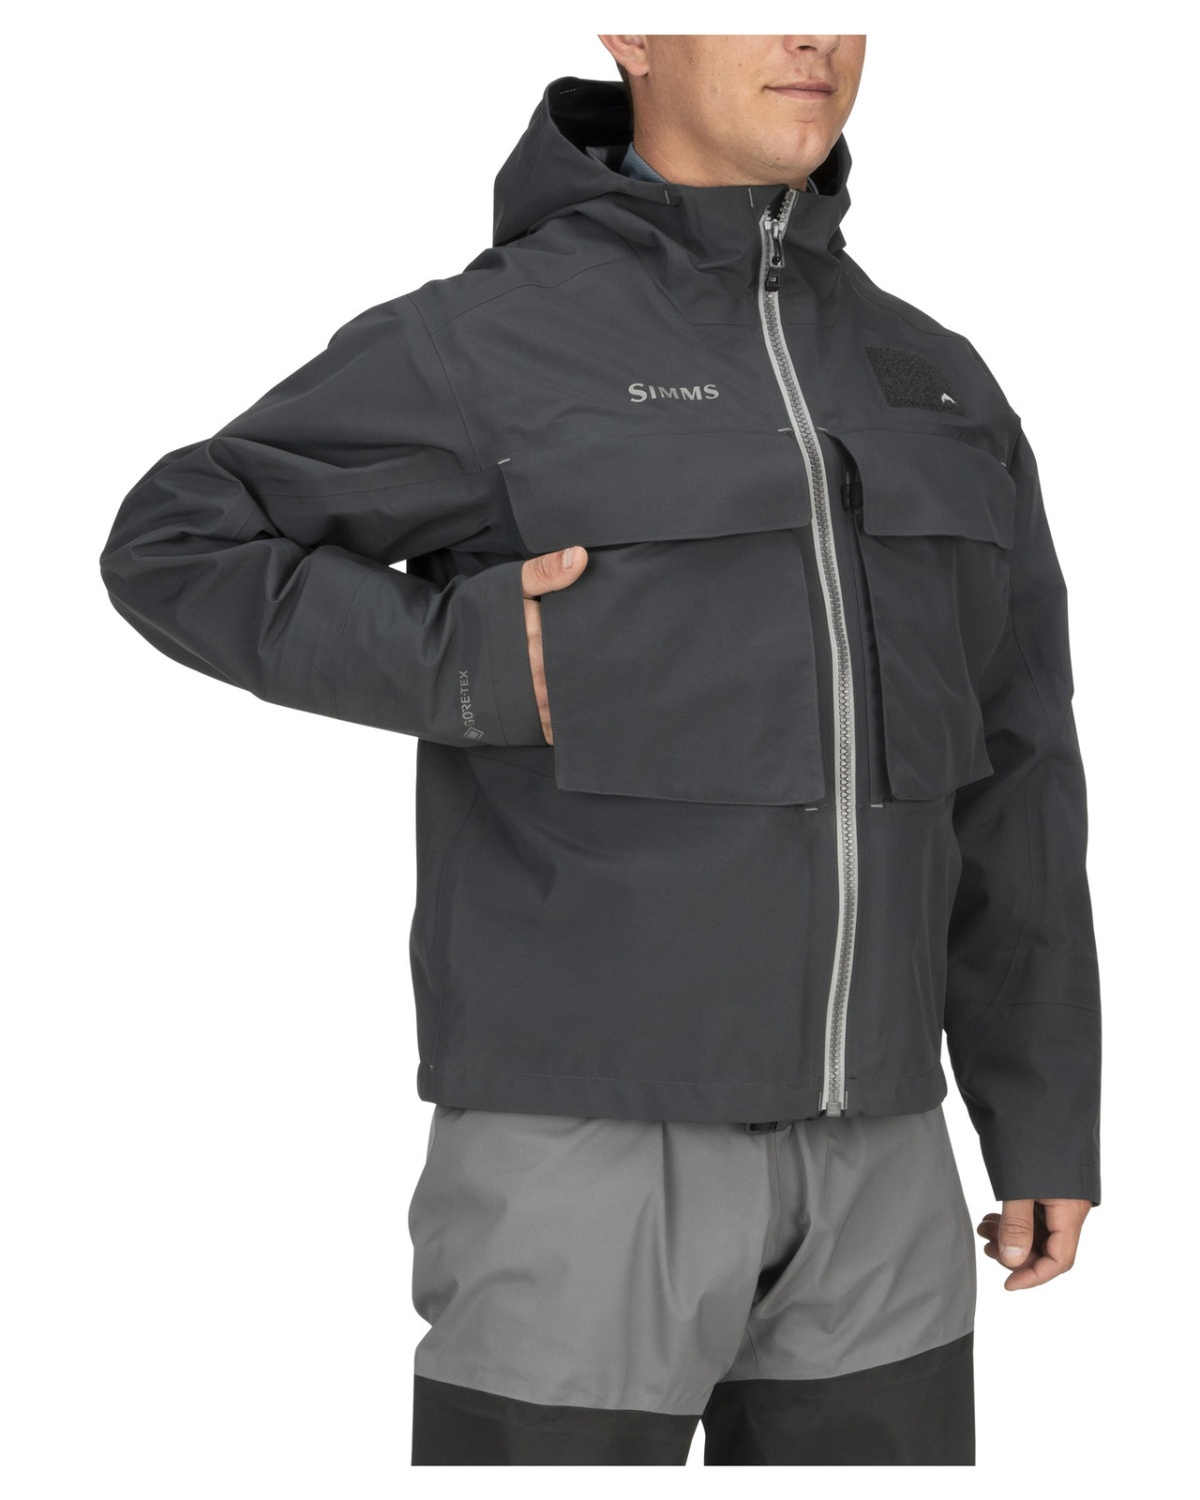 Simms Guide Classic Jacket Carbon 3XL